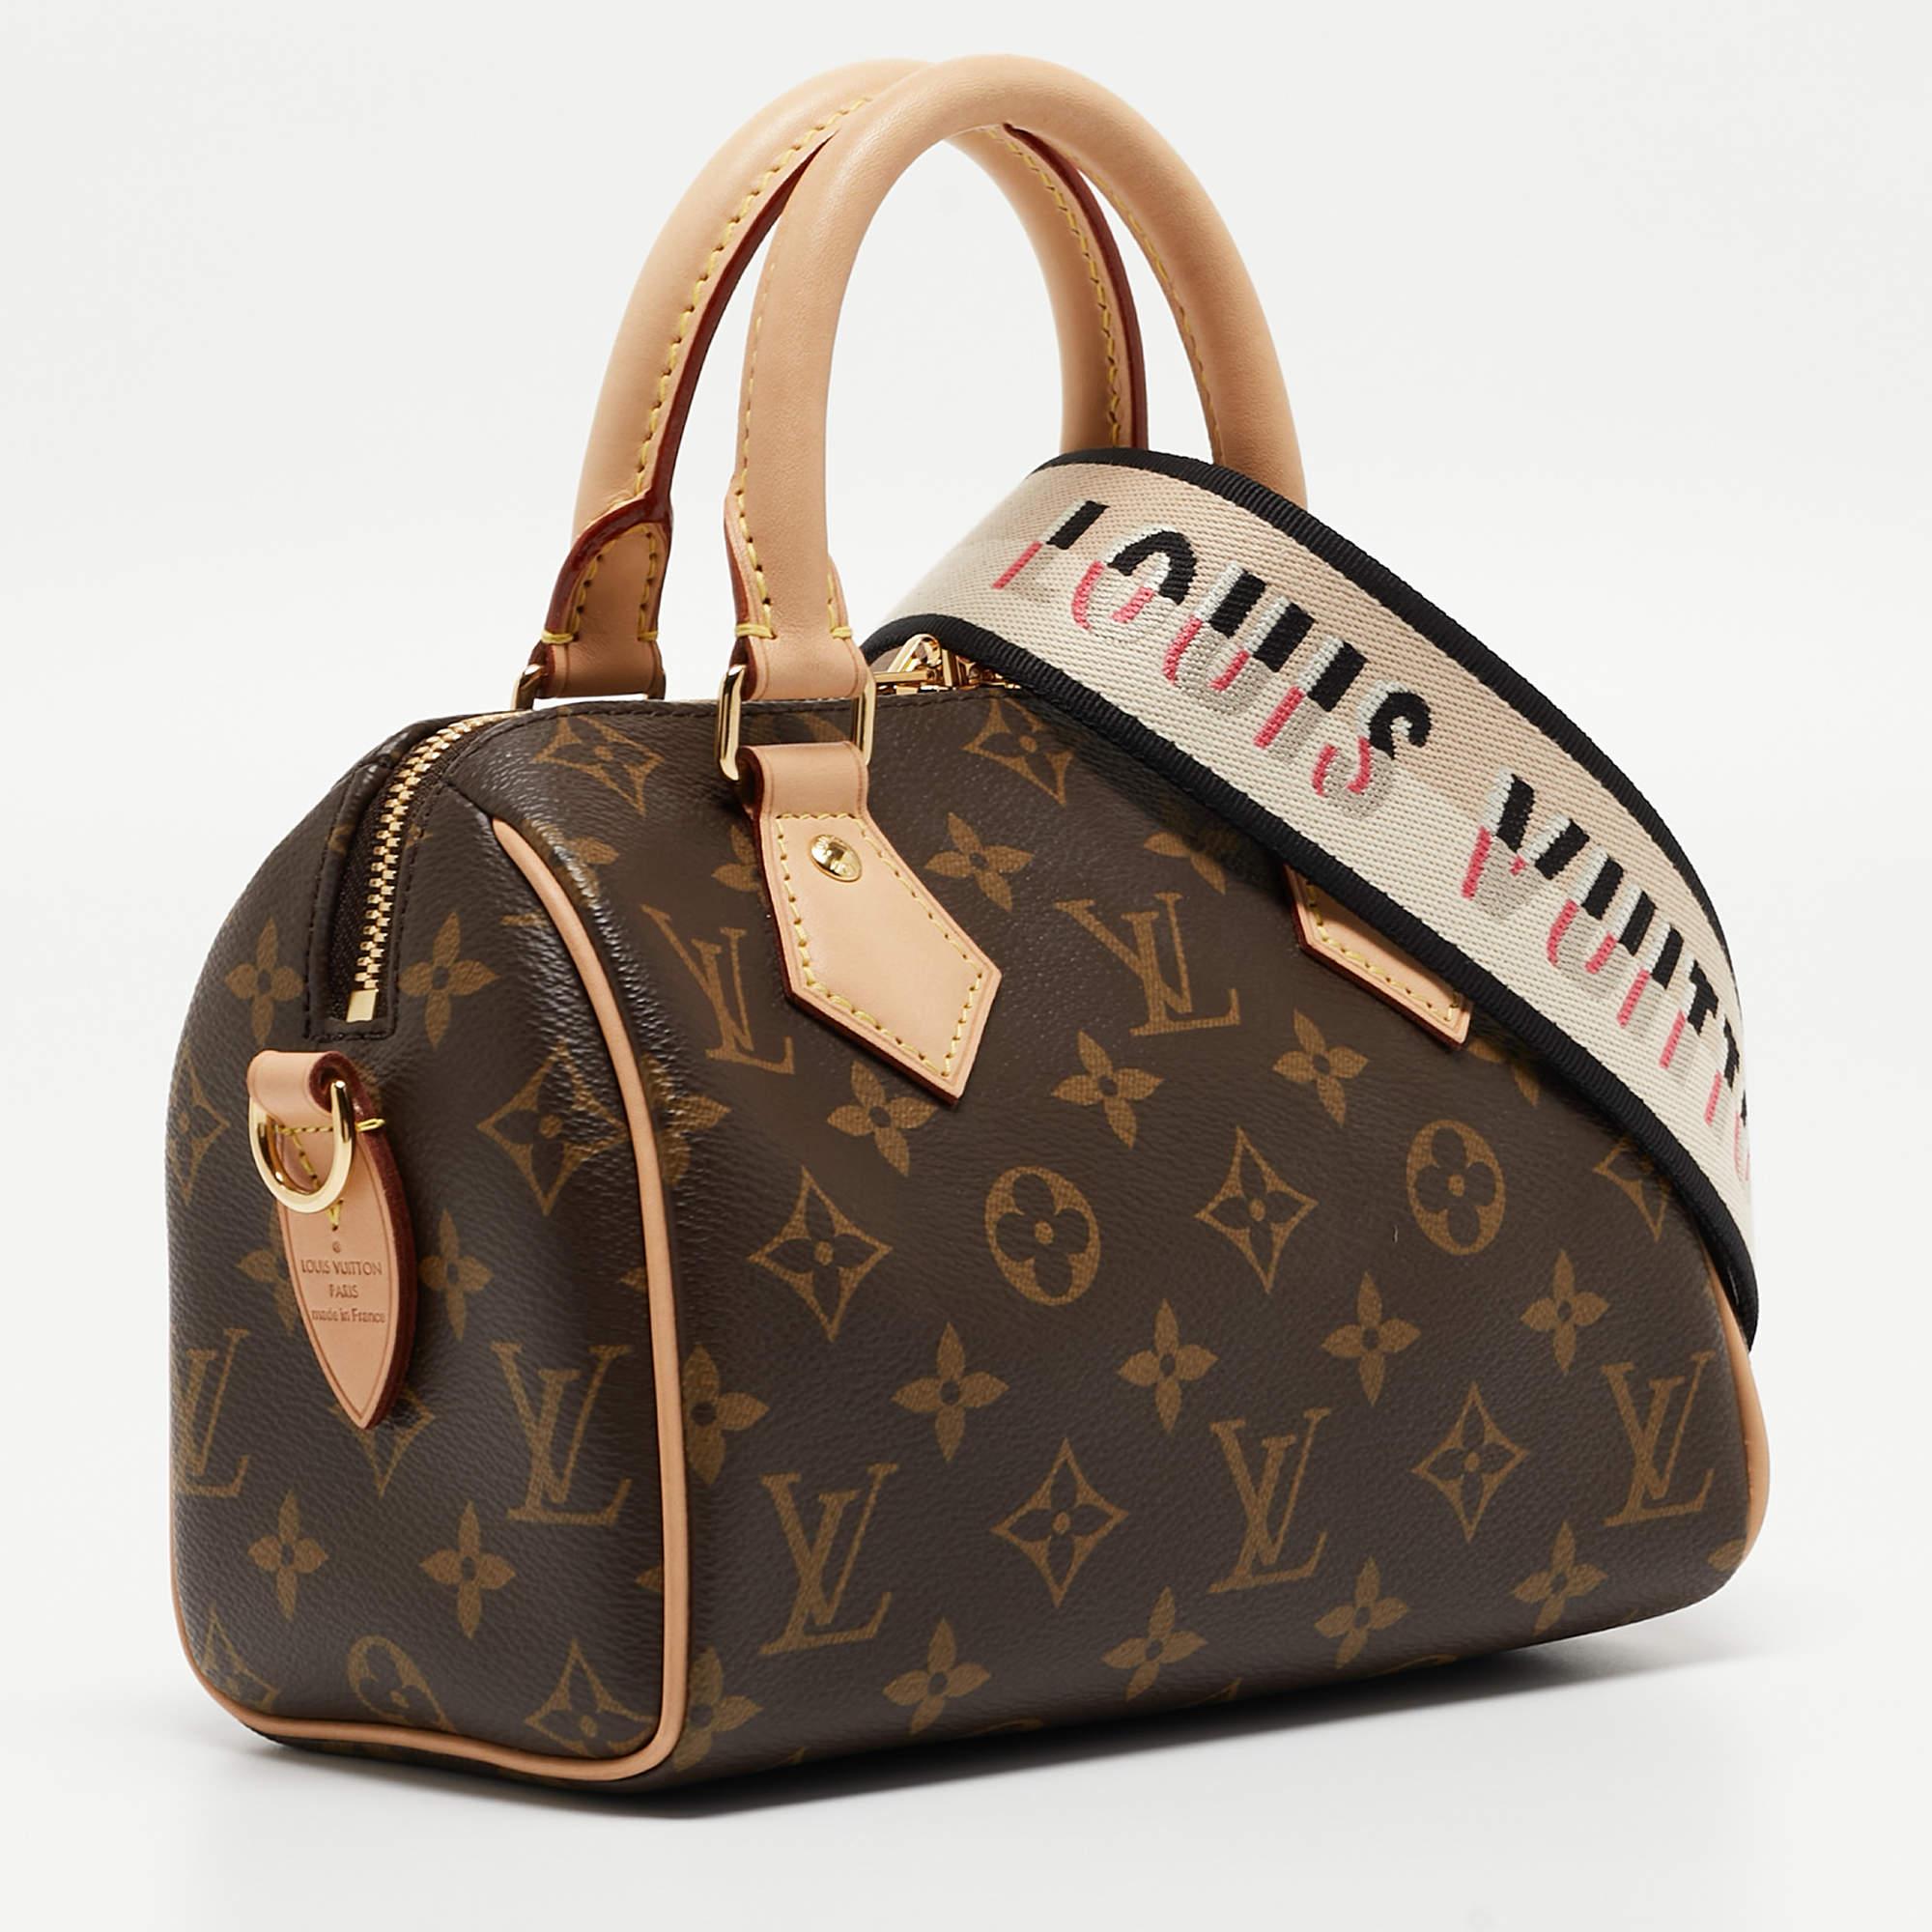 The Louis Vuitton Speedy Bandouliere 20 Bag exudes timeless elegance with its iconic monogram pattern on coated canvas. This compact handbag features vachetta leather trim, a detachable and adjustable shoulder strap, and a zip-top closure, making it